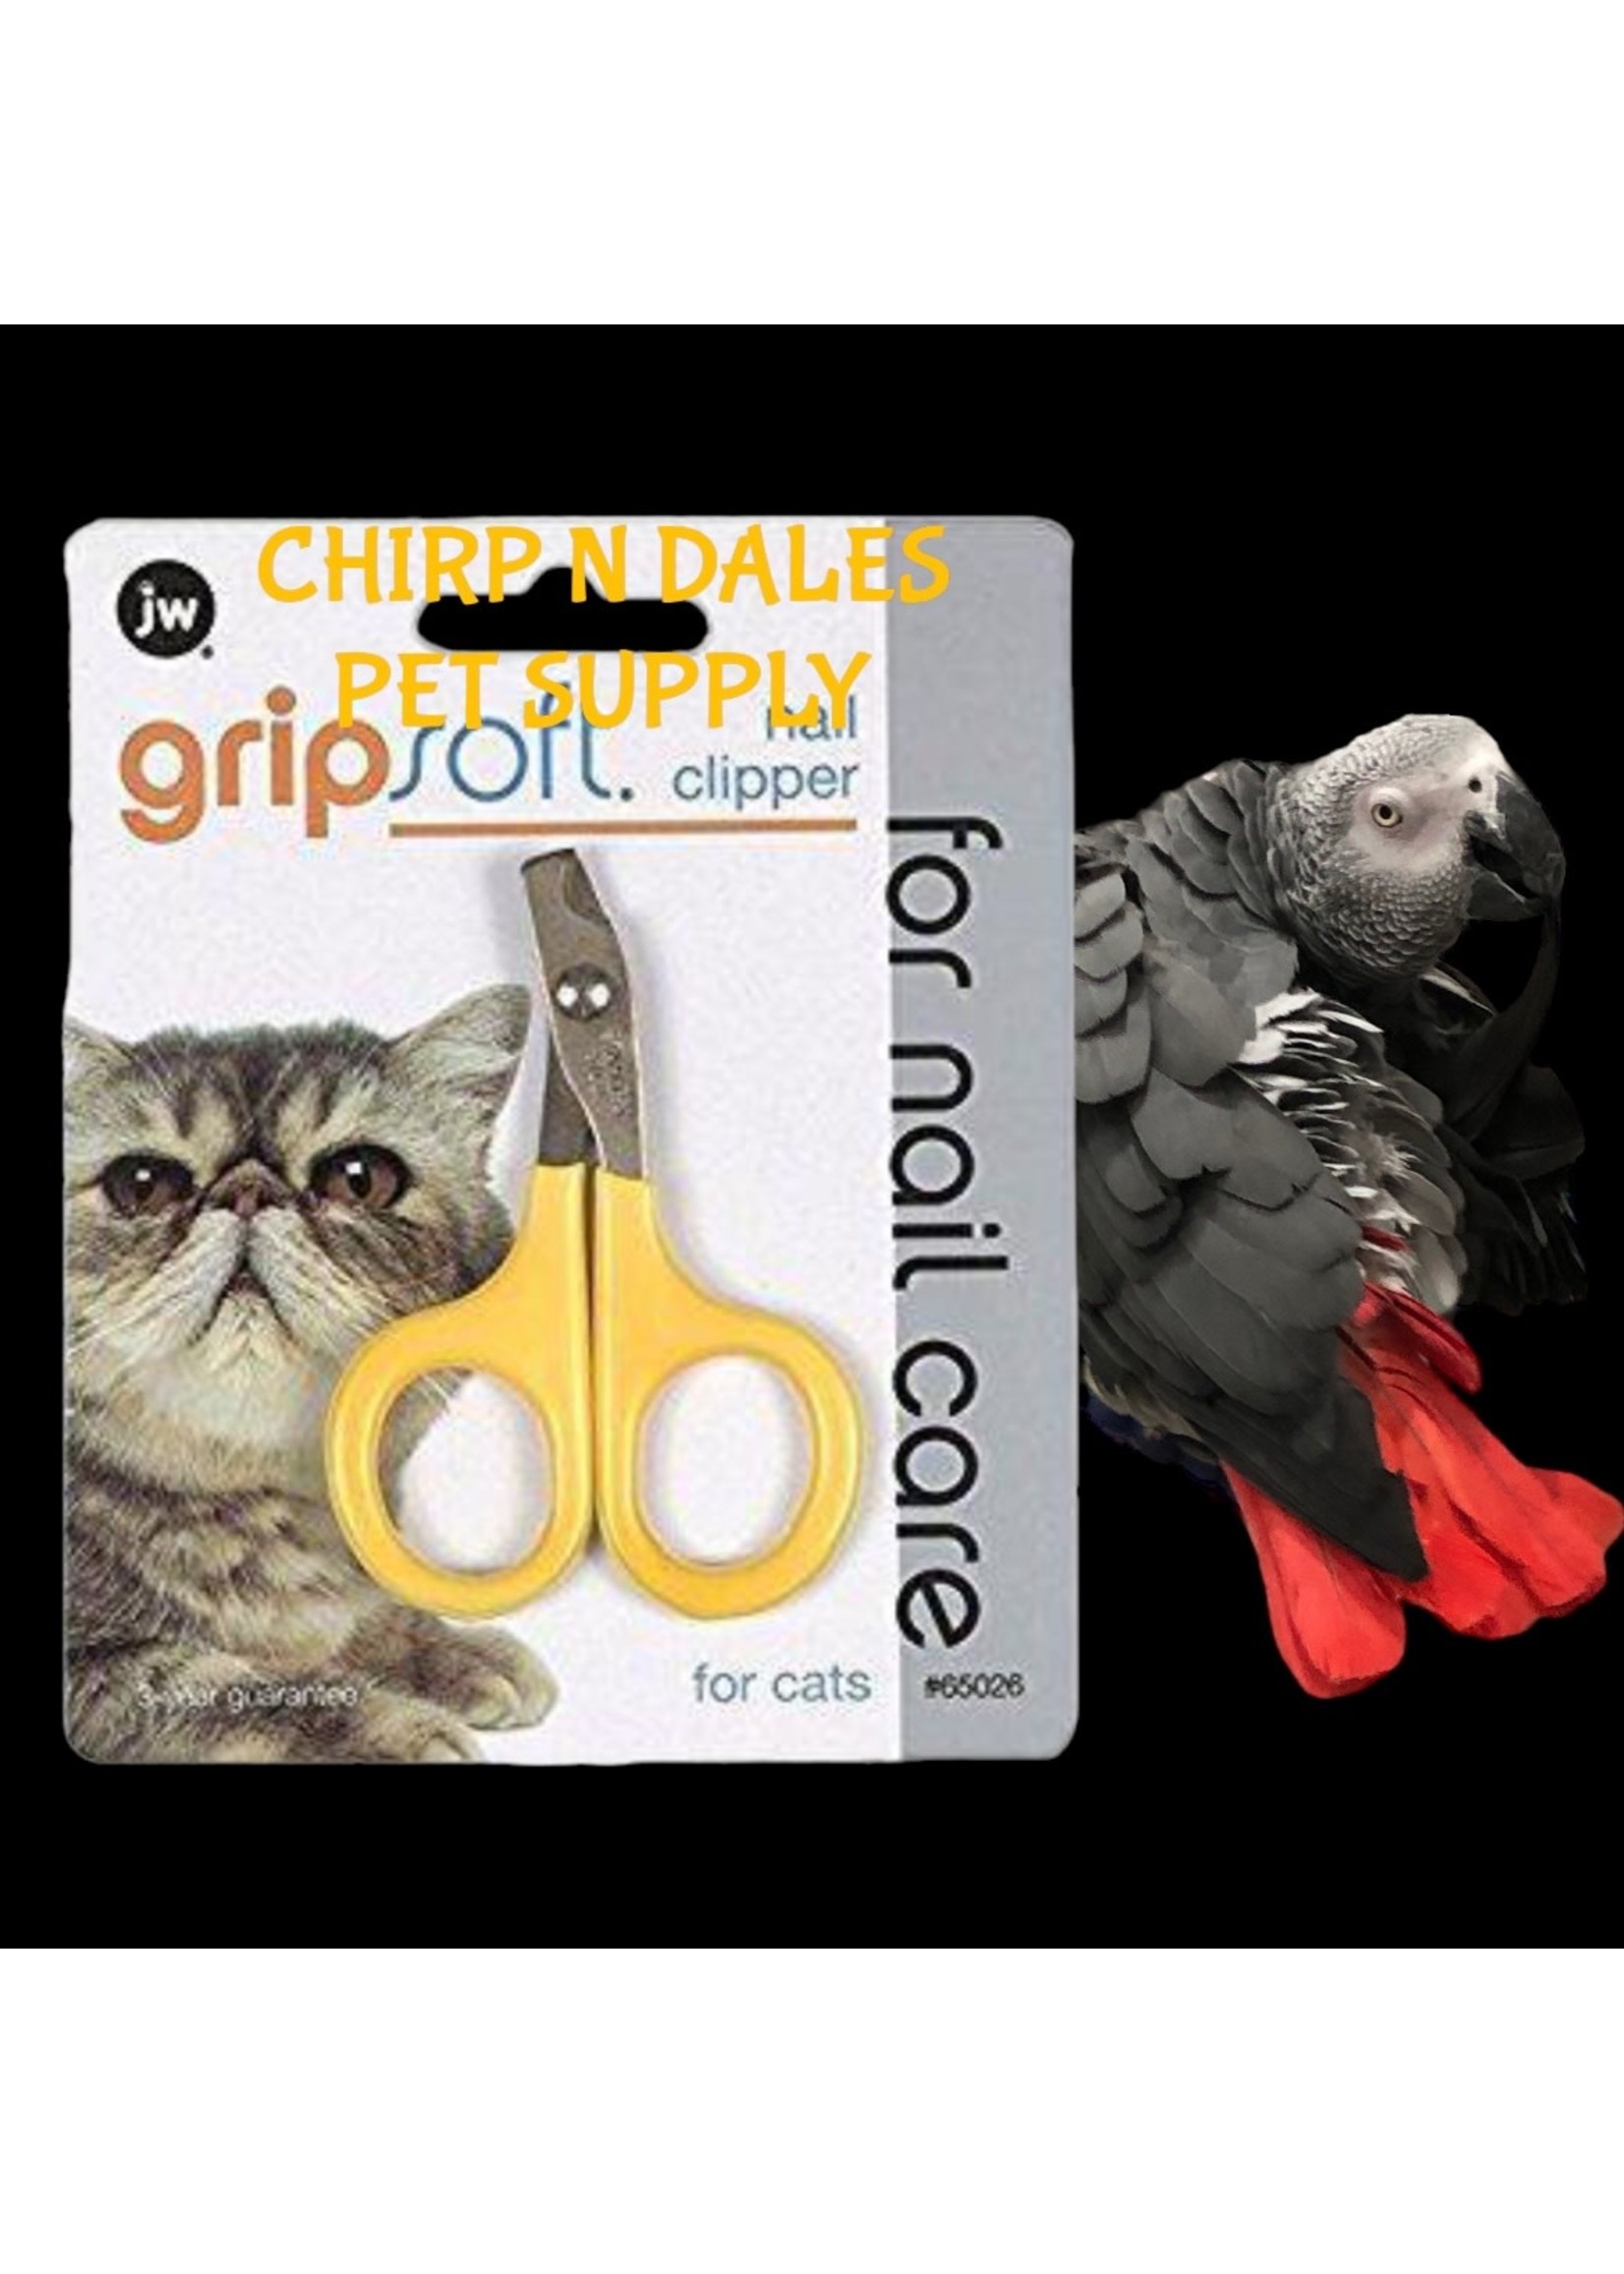 JW JW / Gripsoft Nail Clipper For Cats